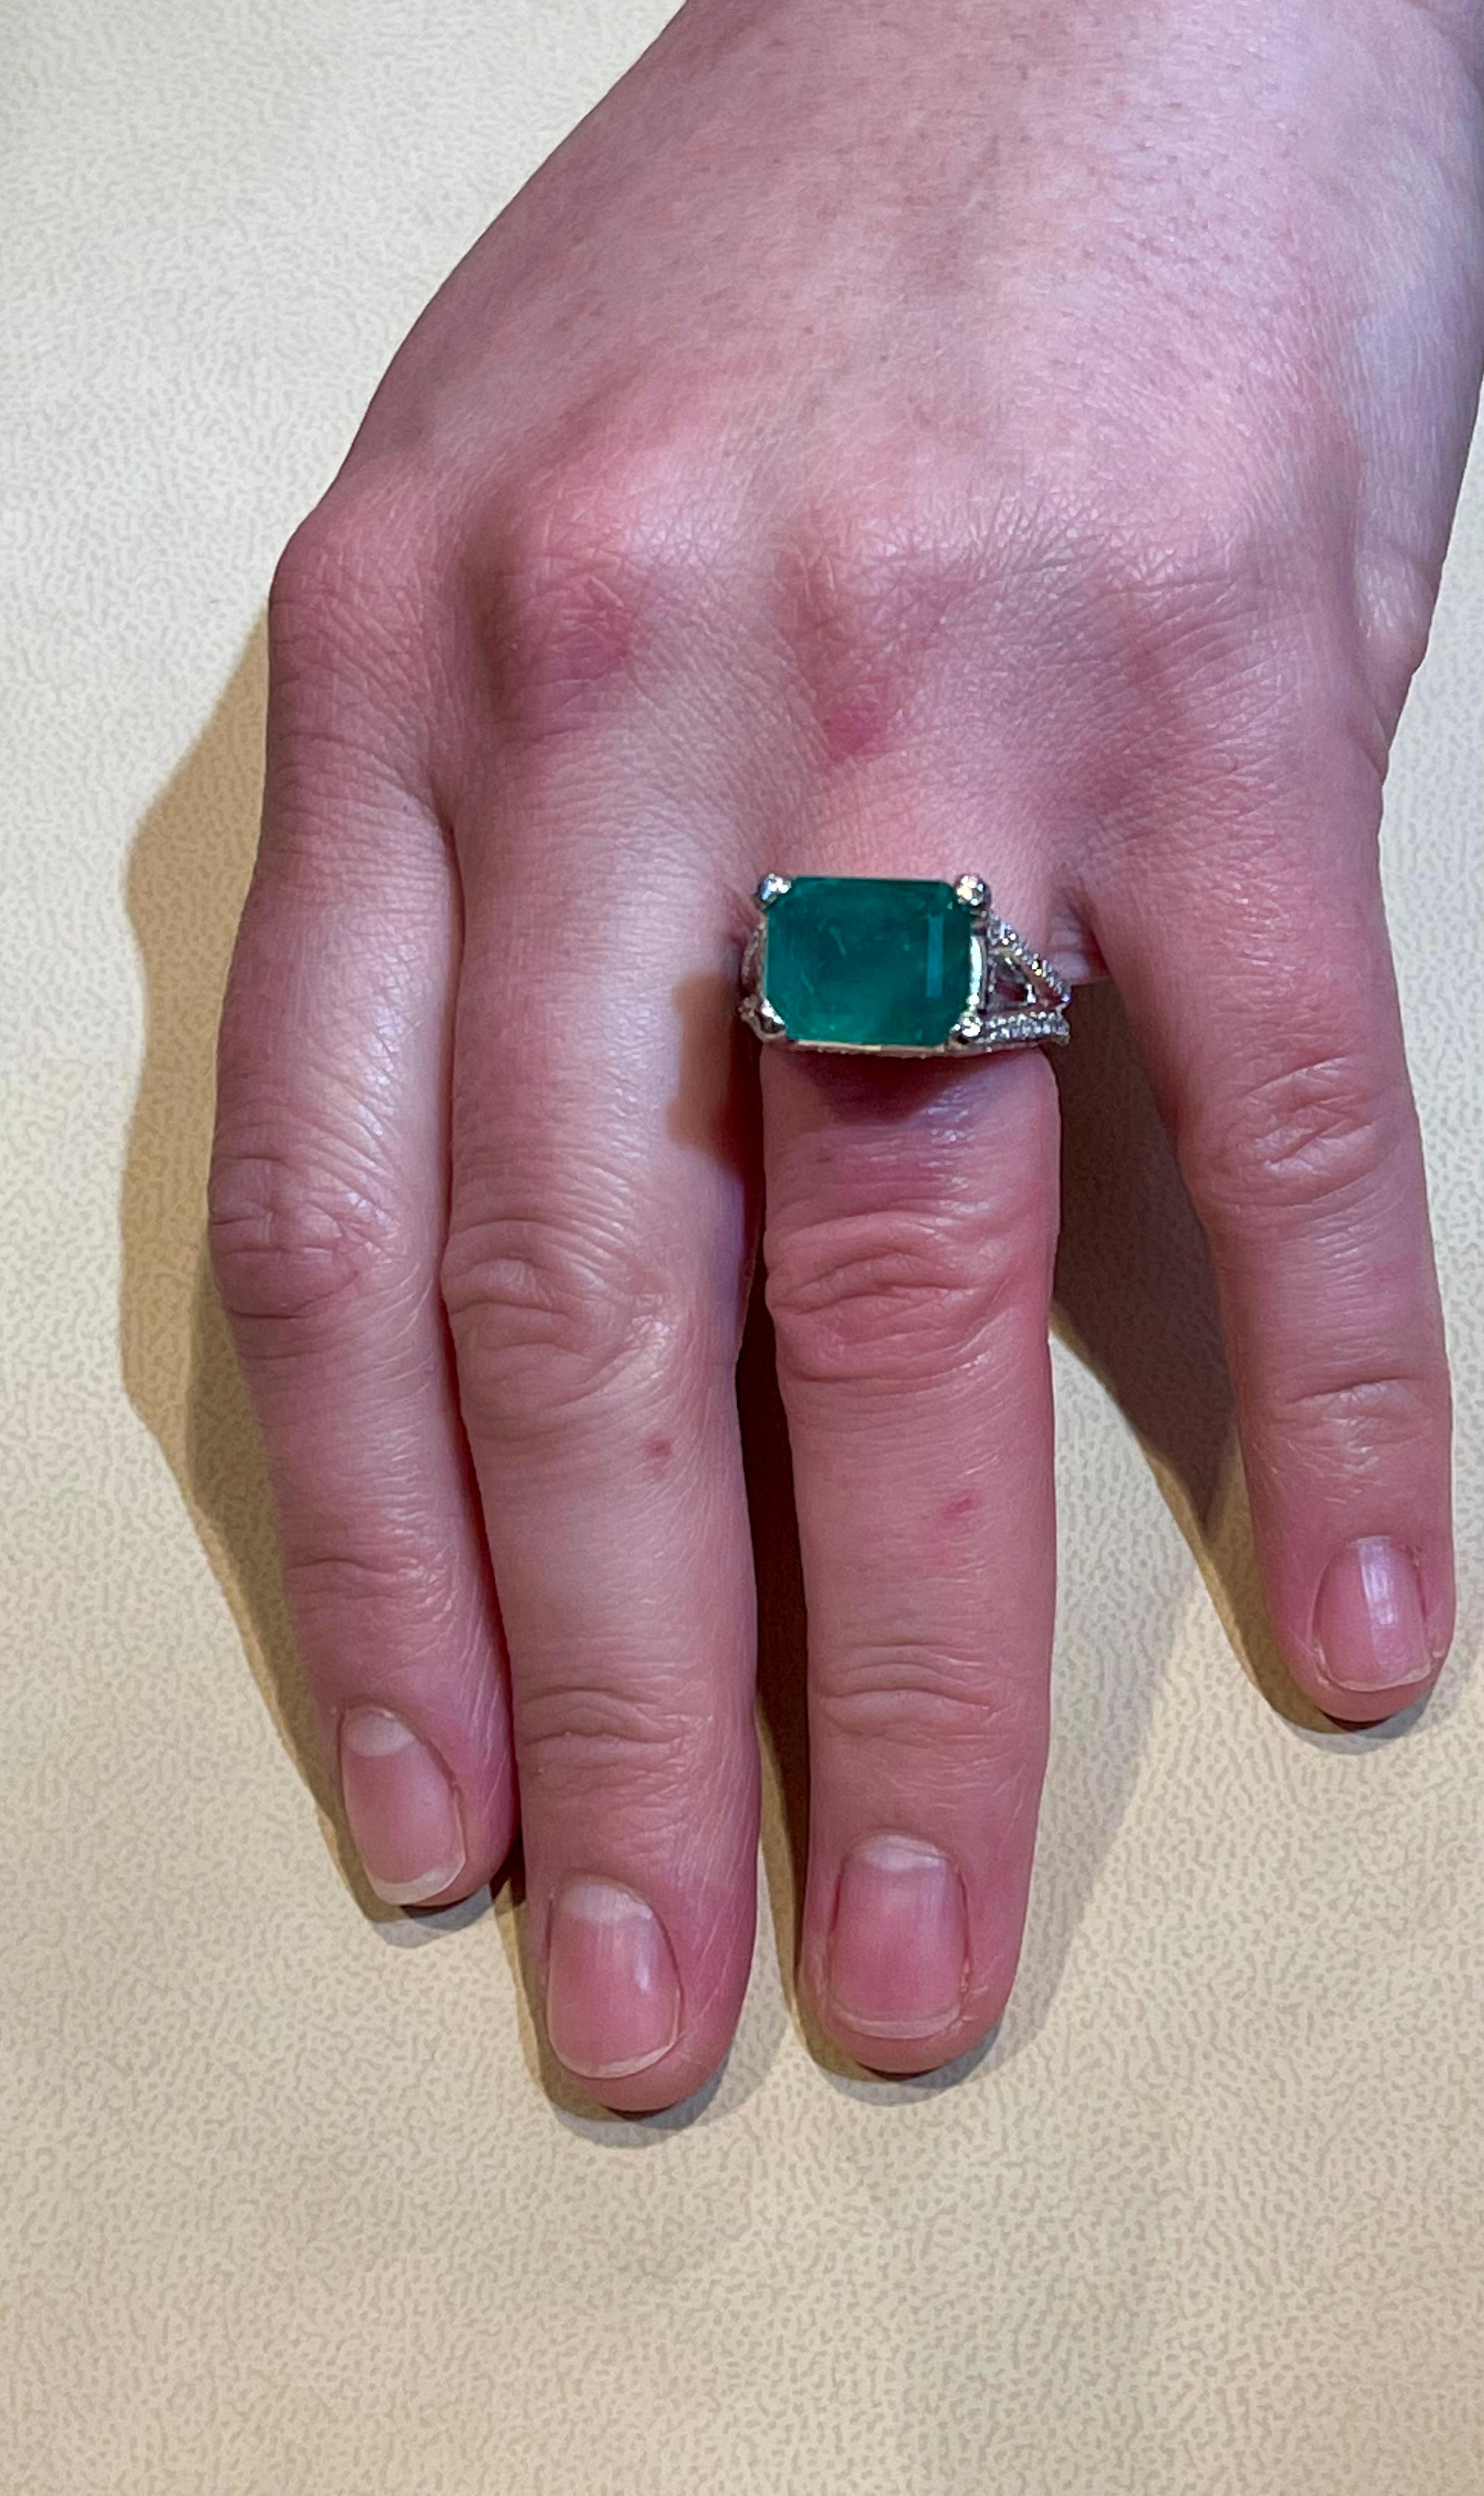 8.5 Carat Emerald Cut Emerald and 4 Ct Diamond Ring Platinum, Estate 6.5 Unisex In Excellent Condition For Sale In New York, NY